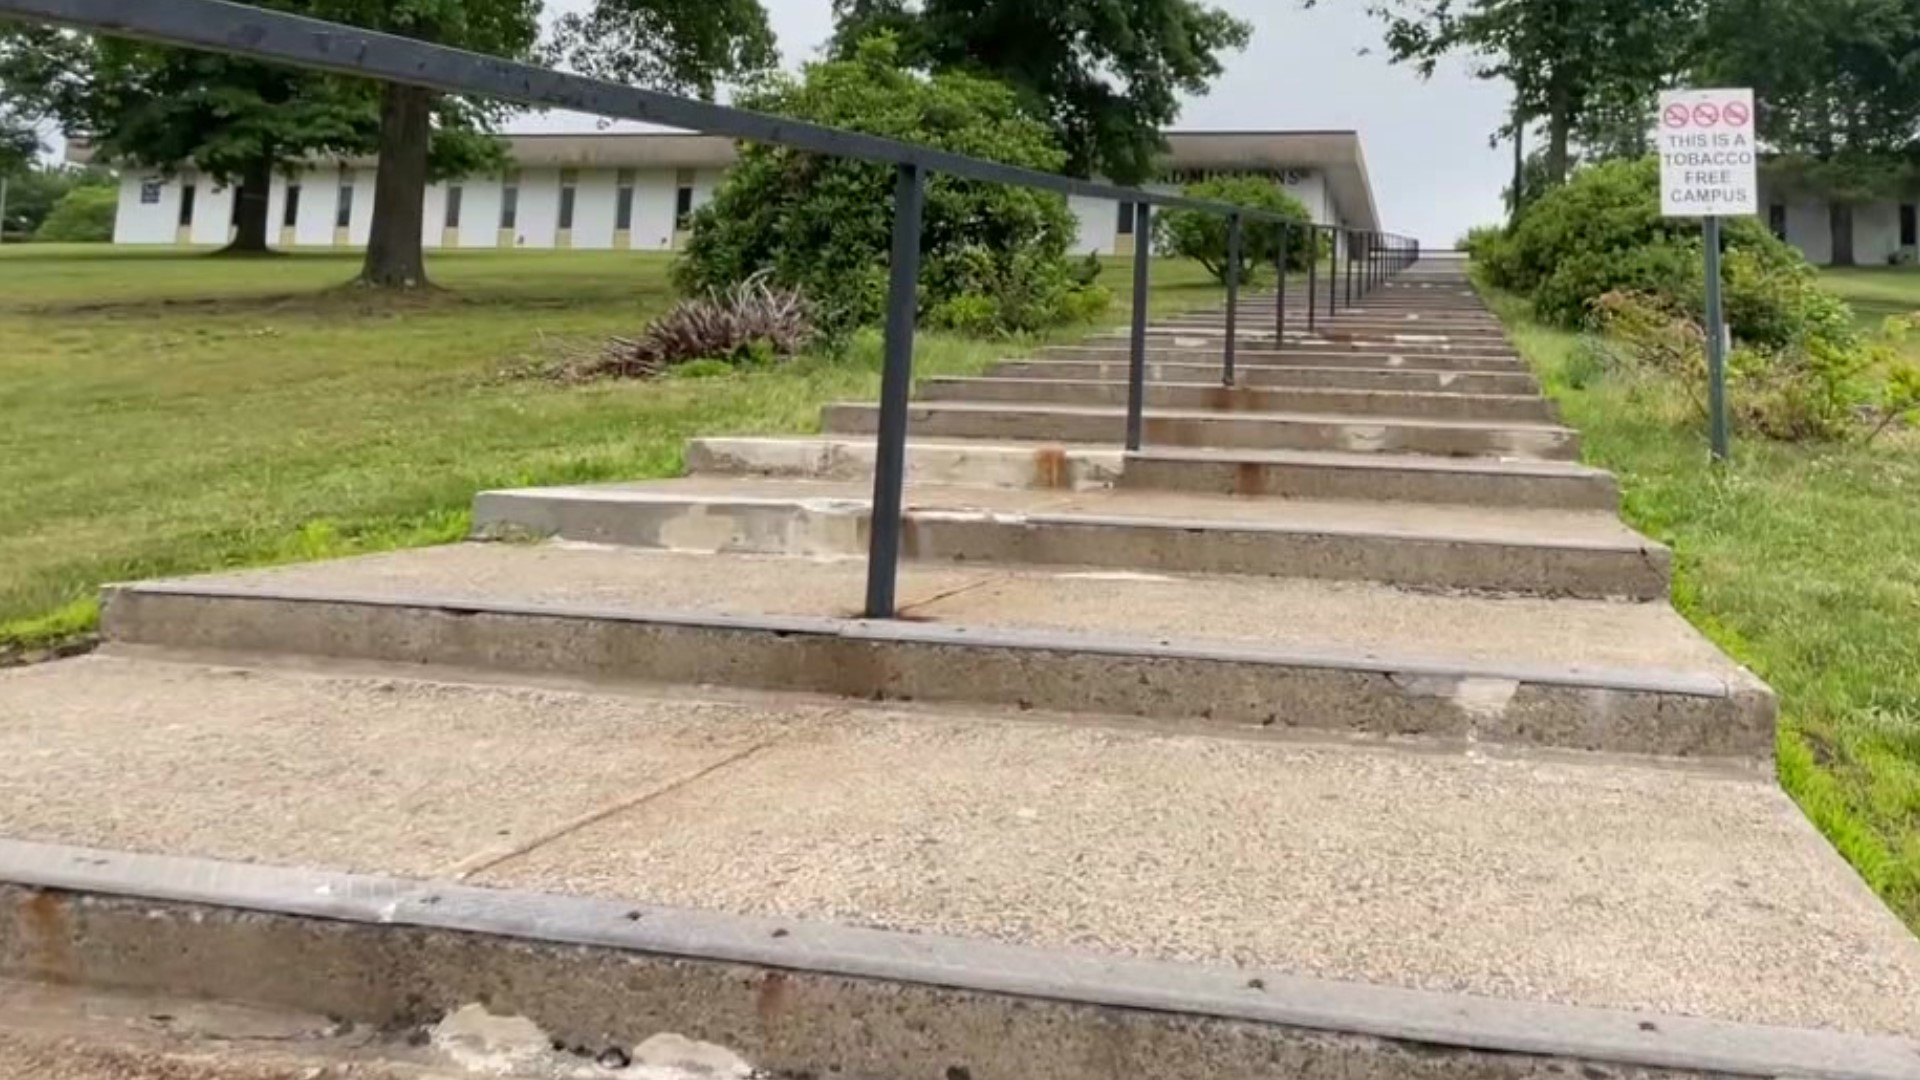 A well-known part of a college campus in Luzerne County is getting a facelift. Some say it's cause for celebration while others are in mourning.